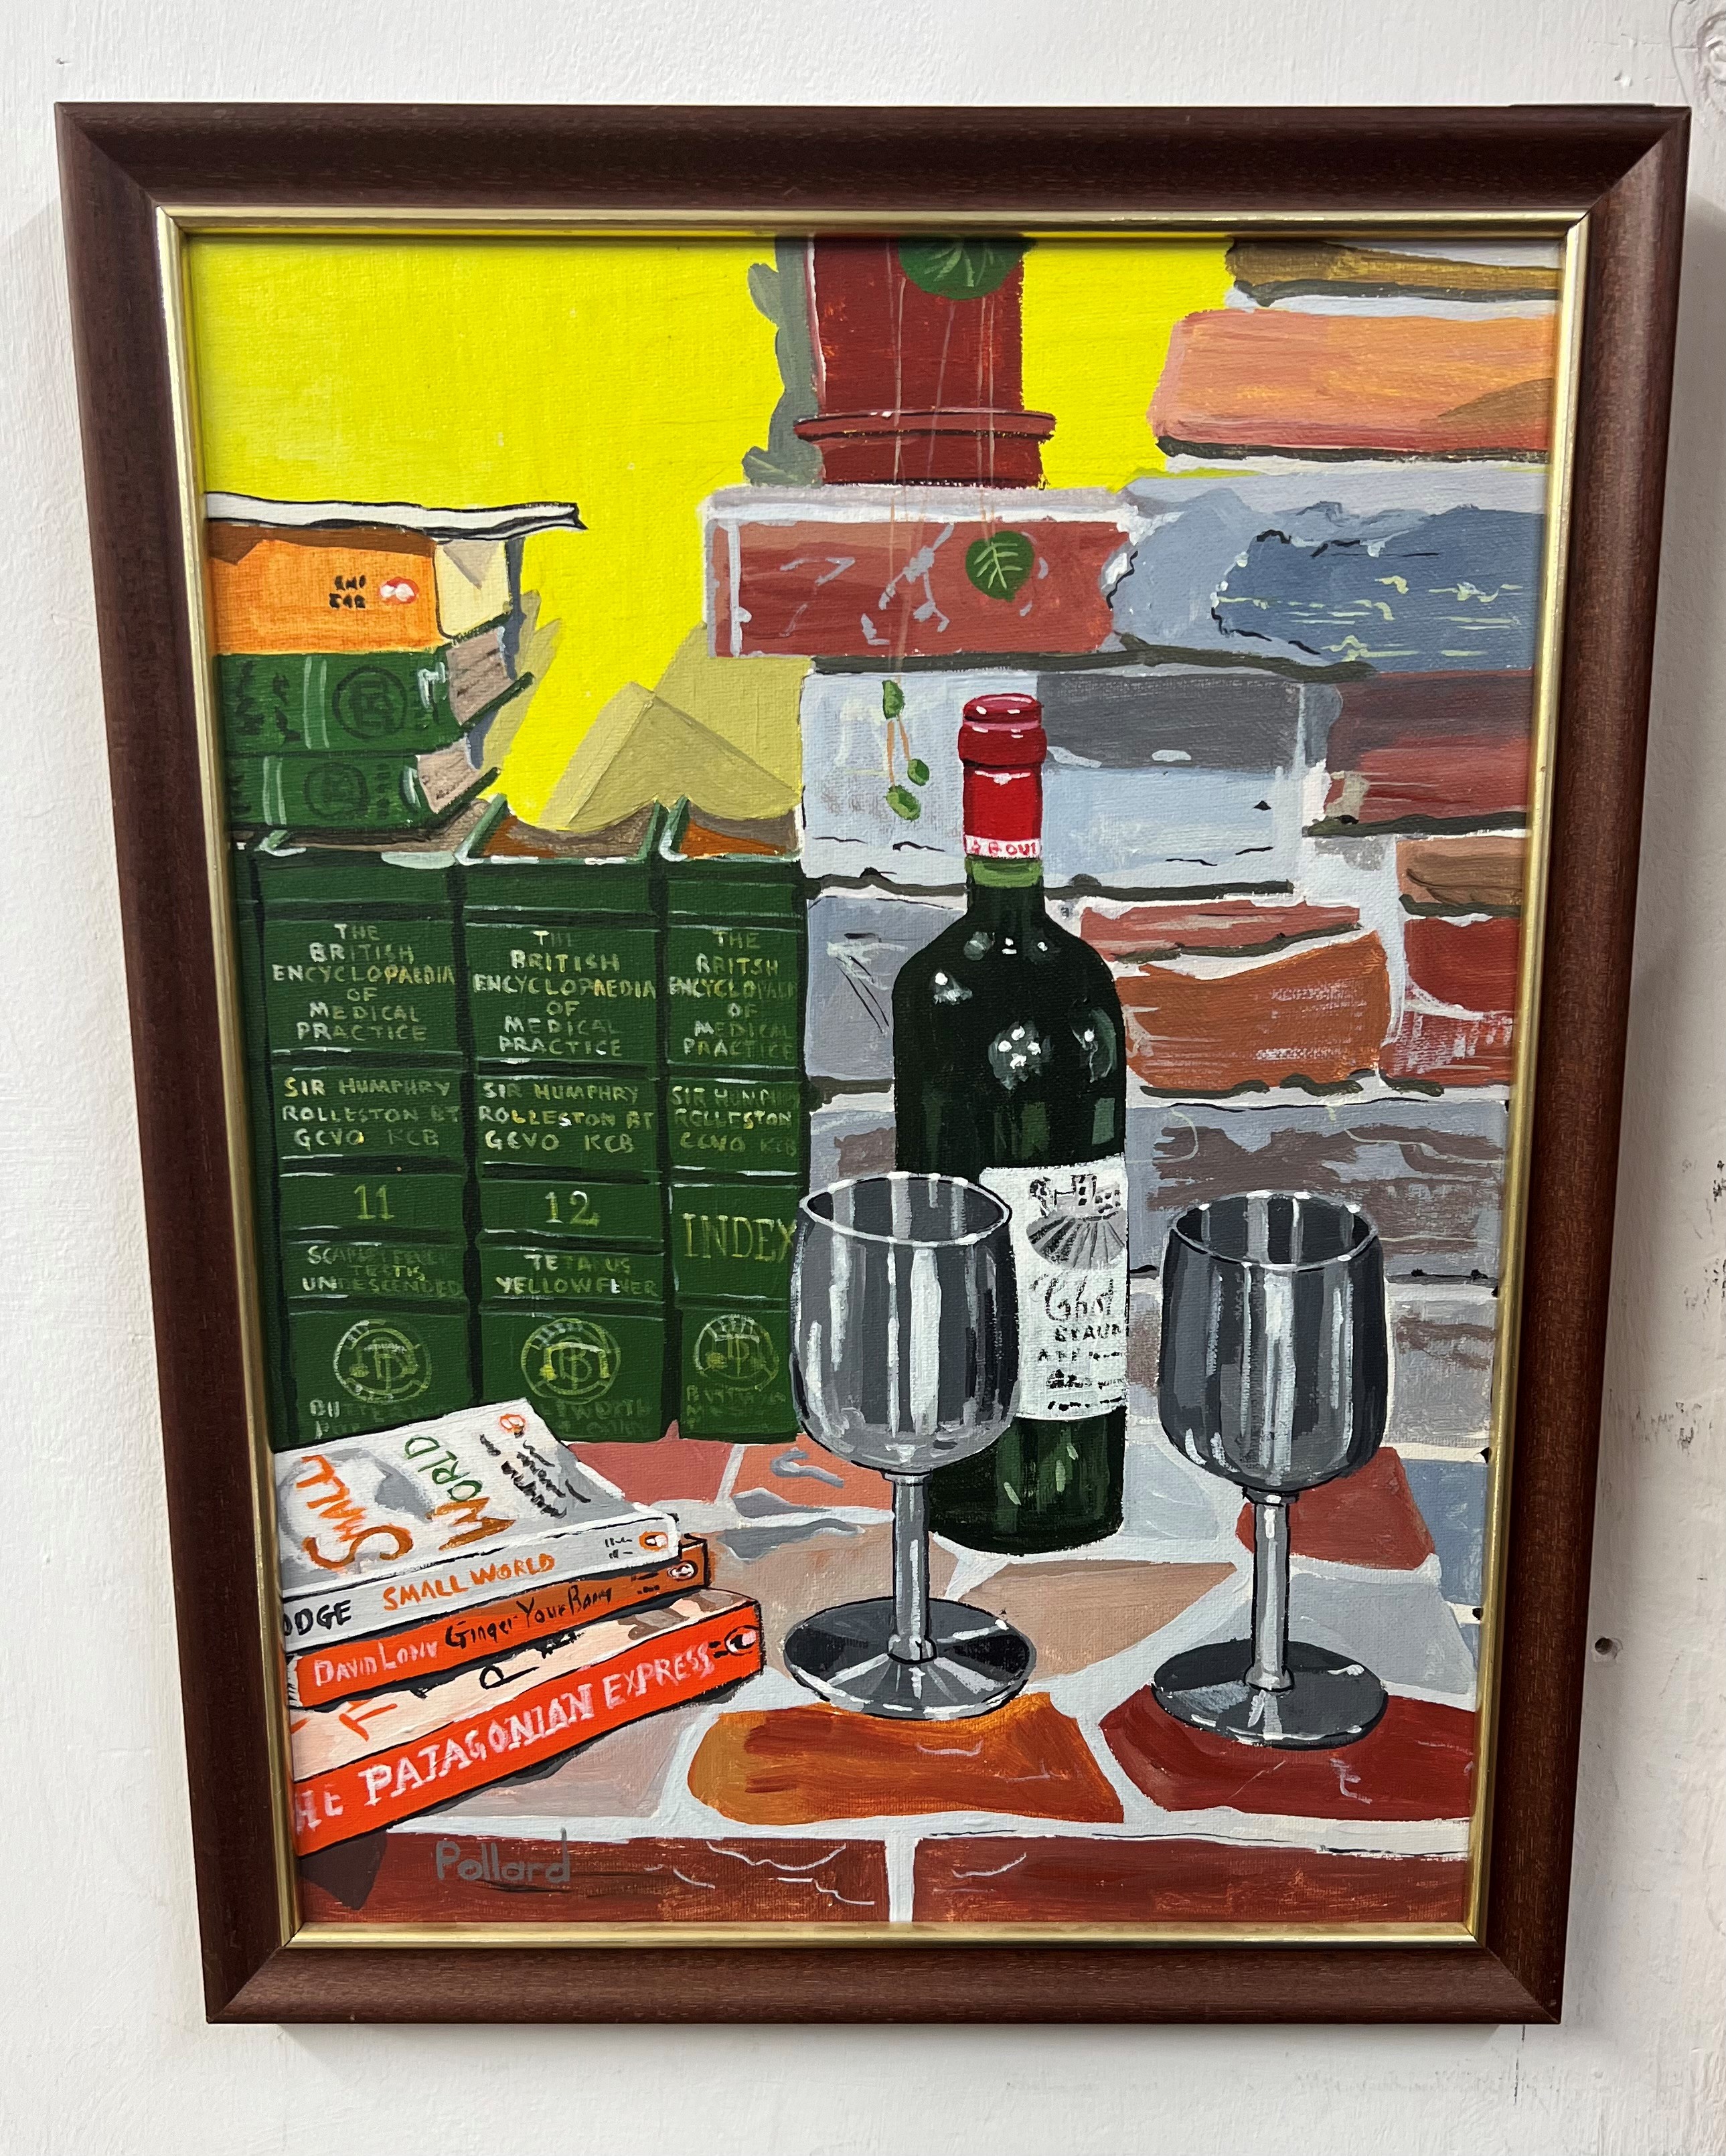 Brian Pollard, 'Fire Place' acrylic on board, dated to the reverse Aug 85, 39cm x 29cm, framed.